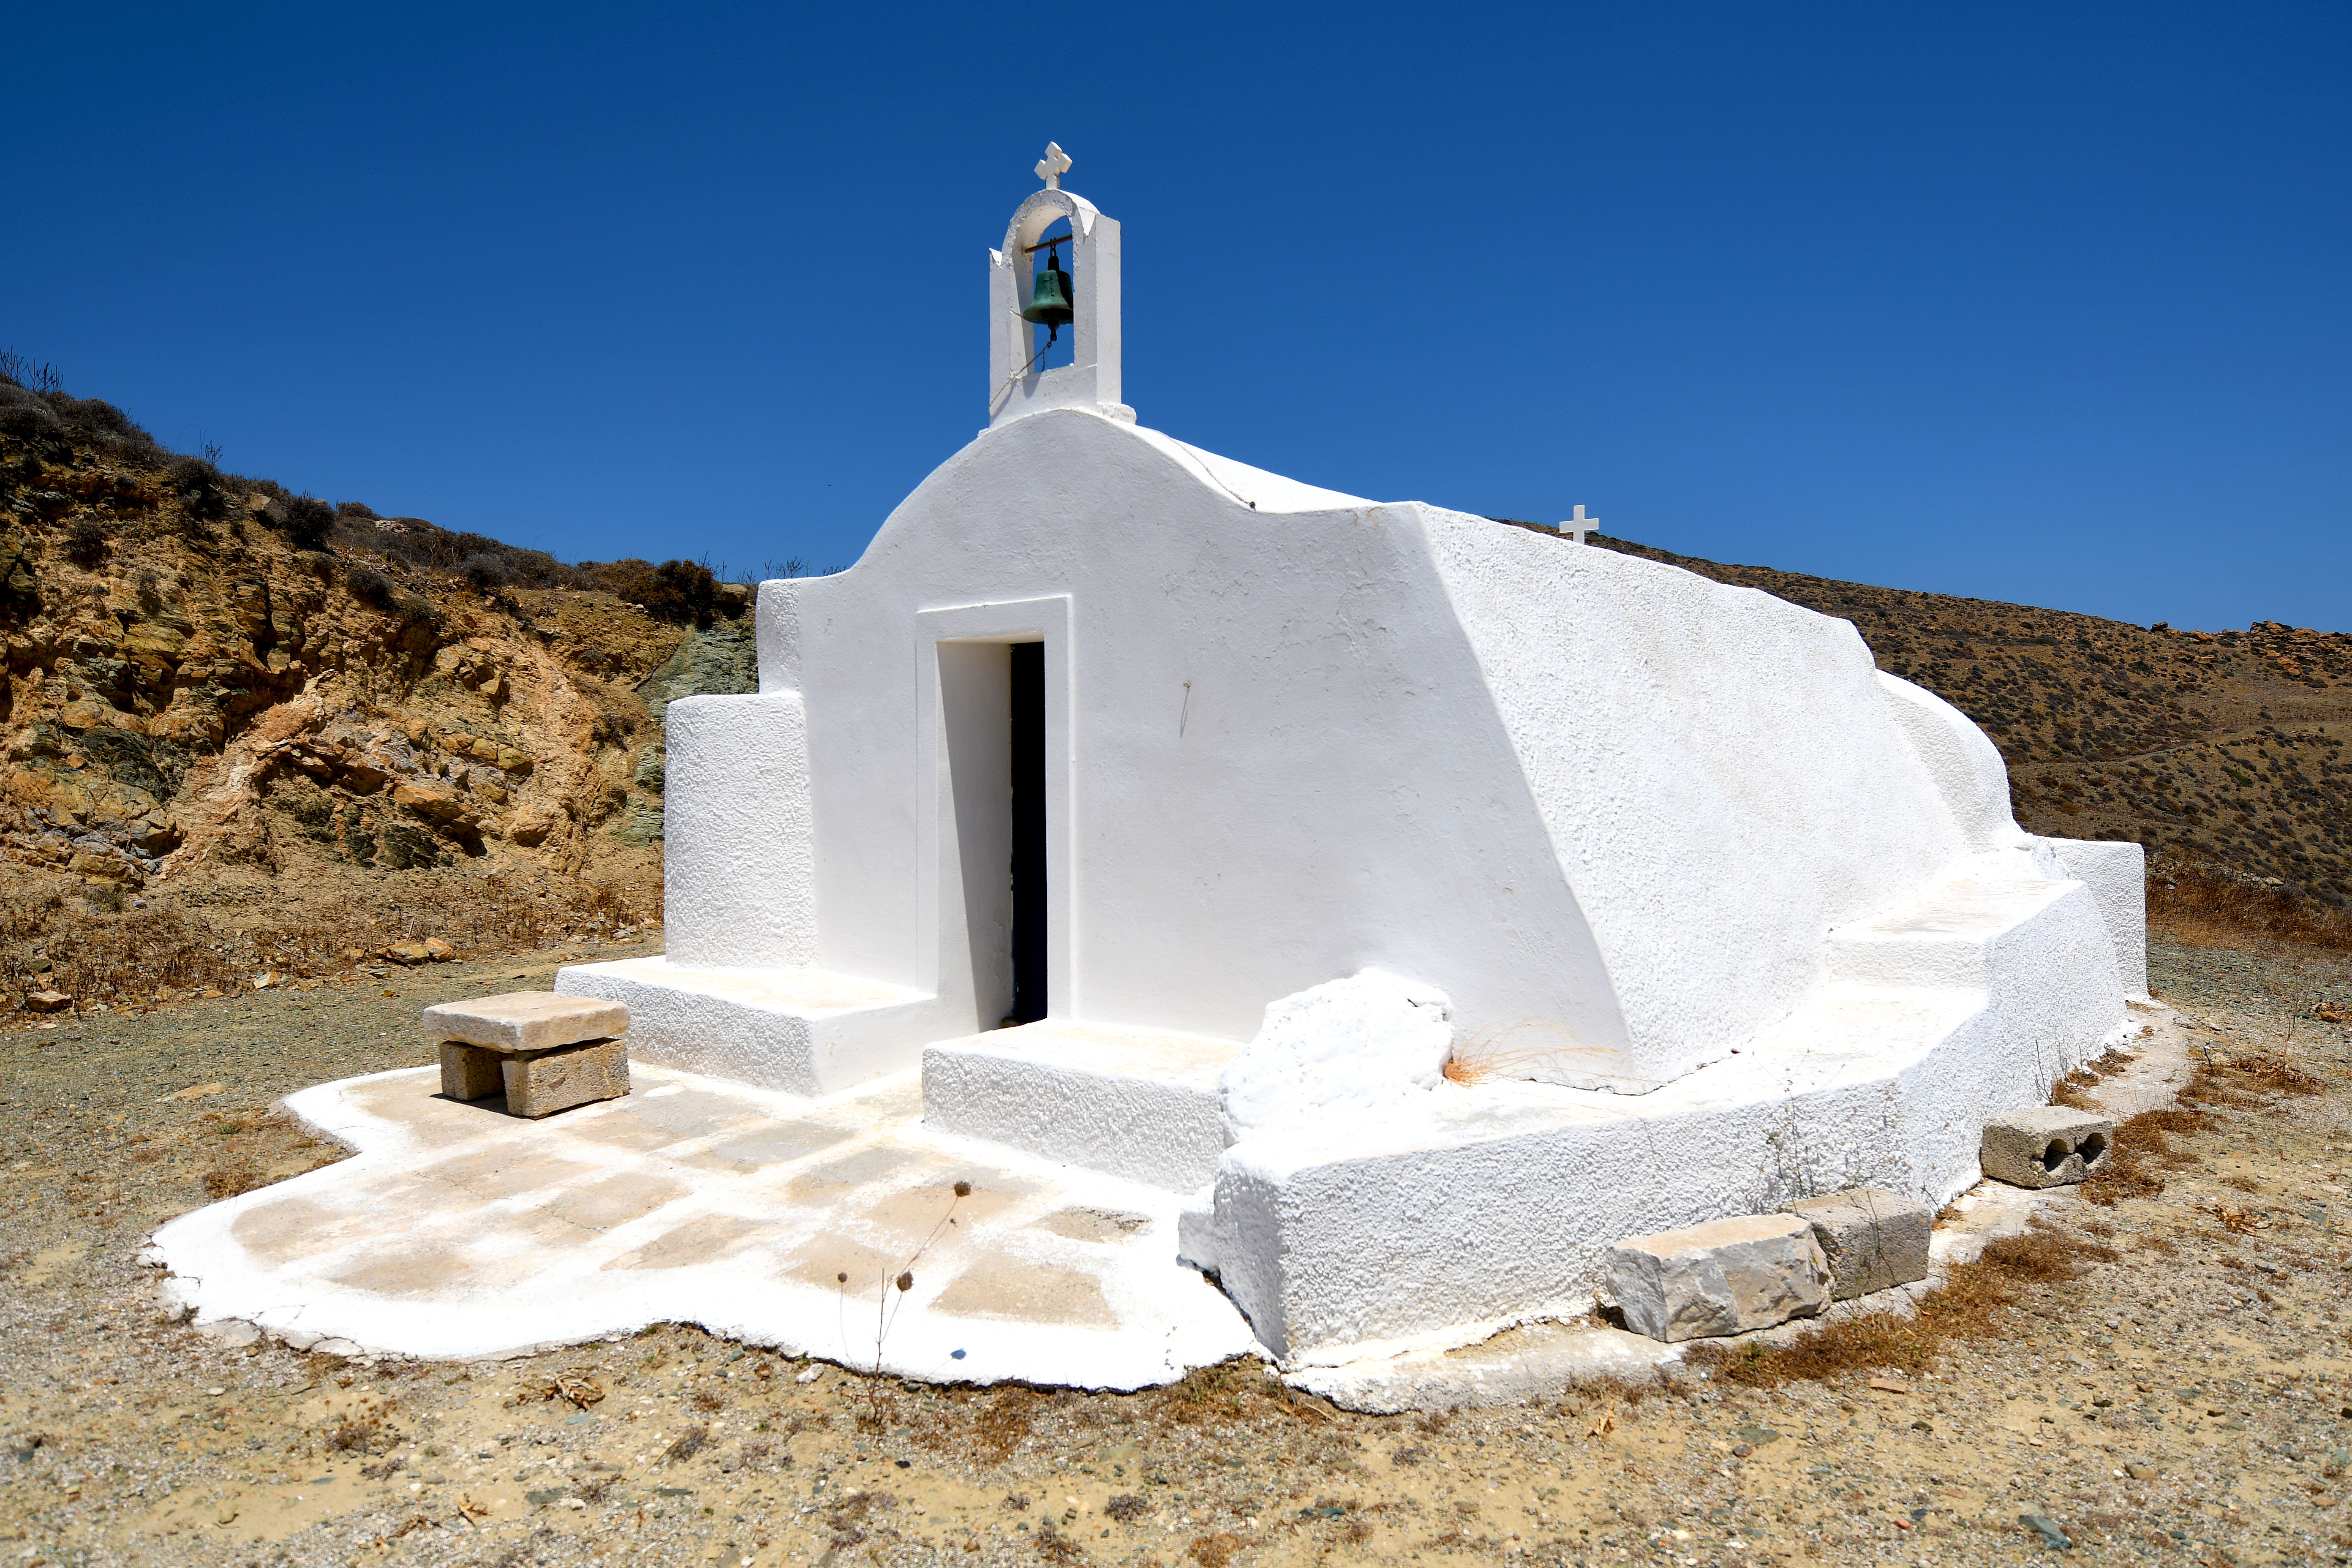 ANJCI ALL OVER | Visiting Anafi A Greek Island Unknown to Many